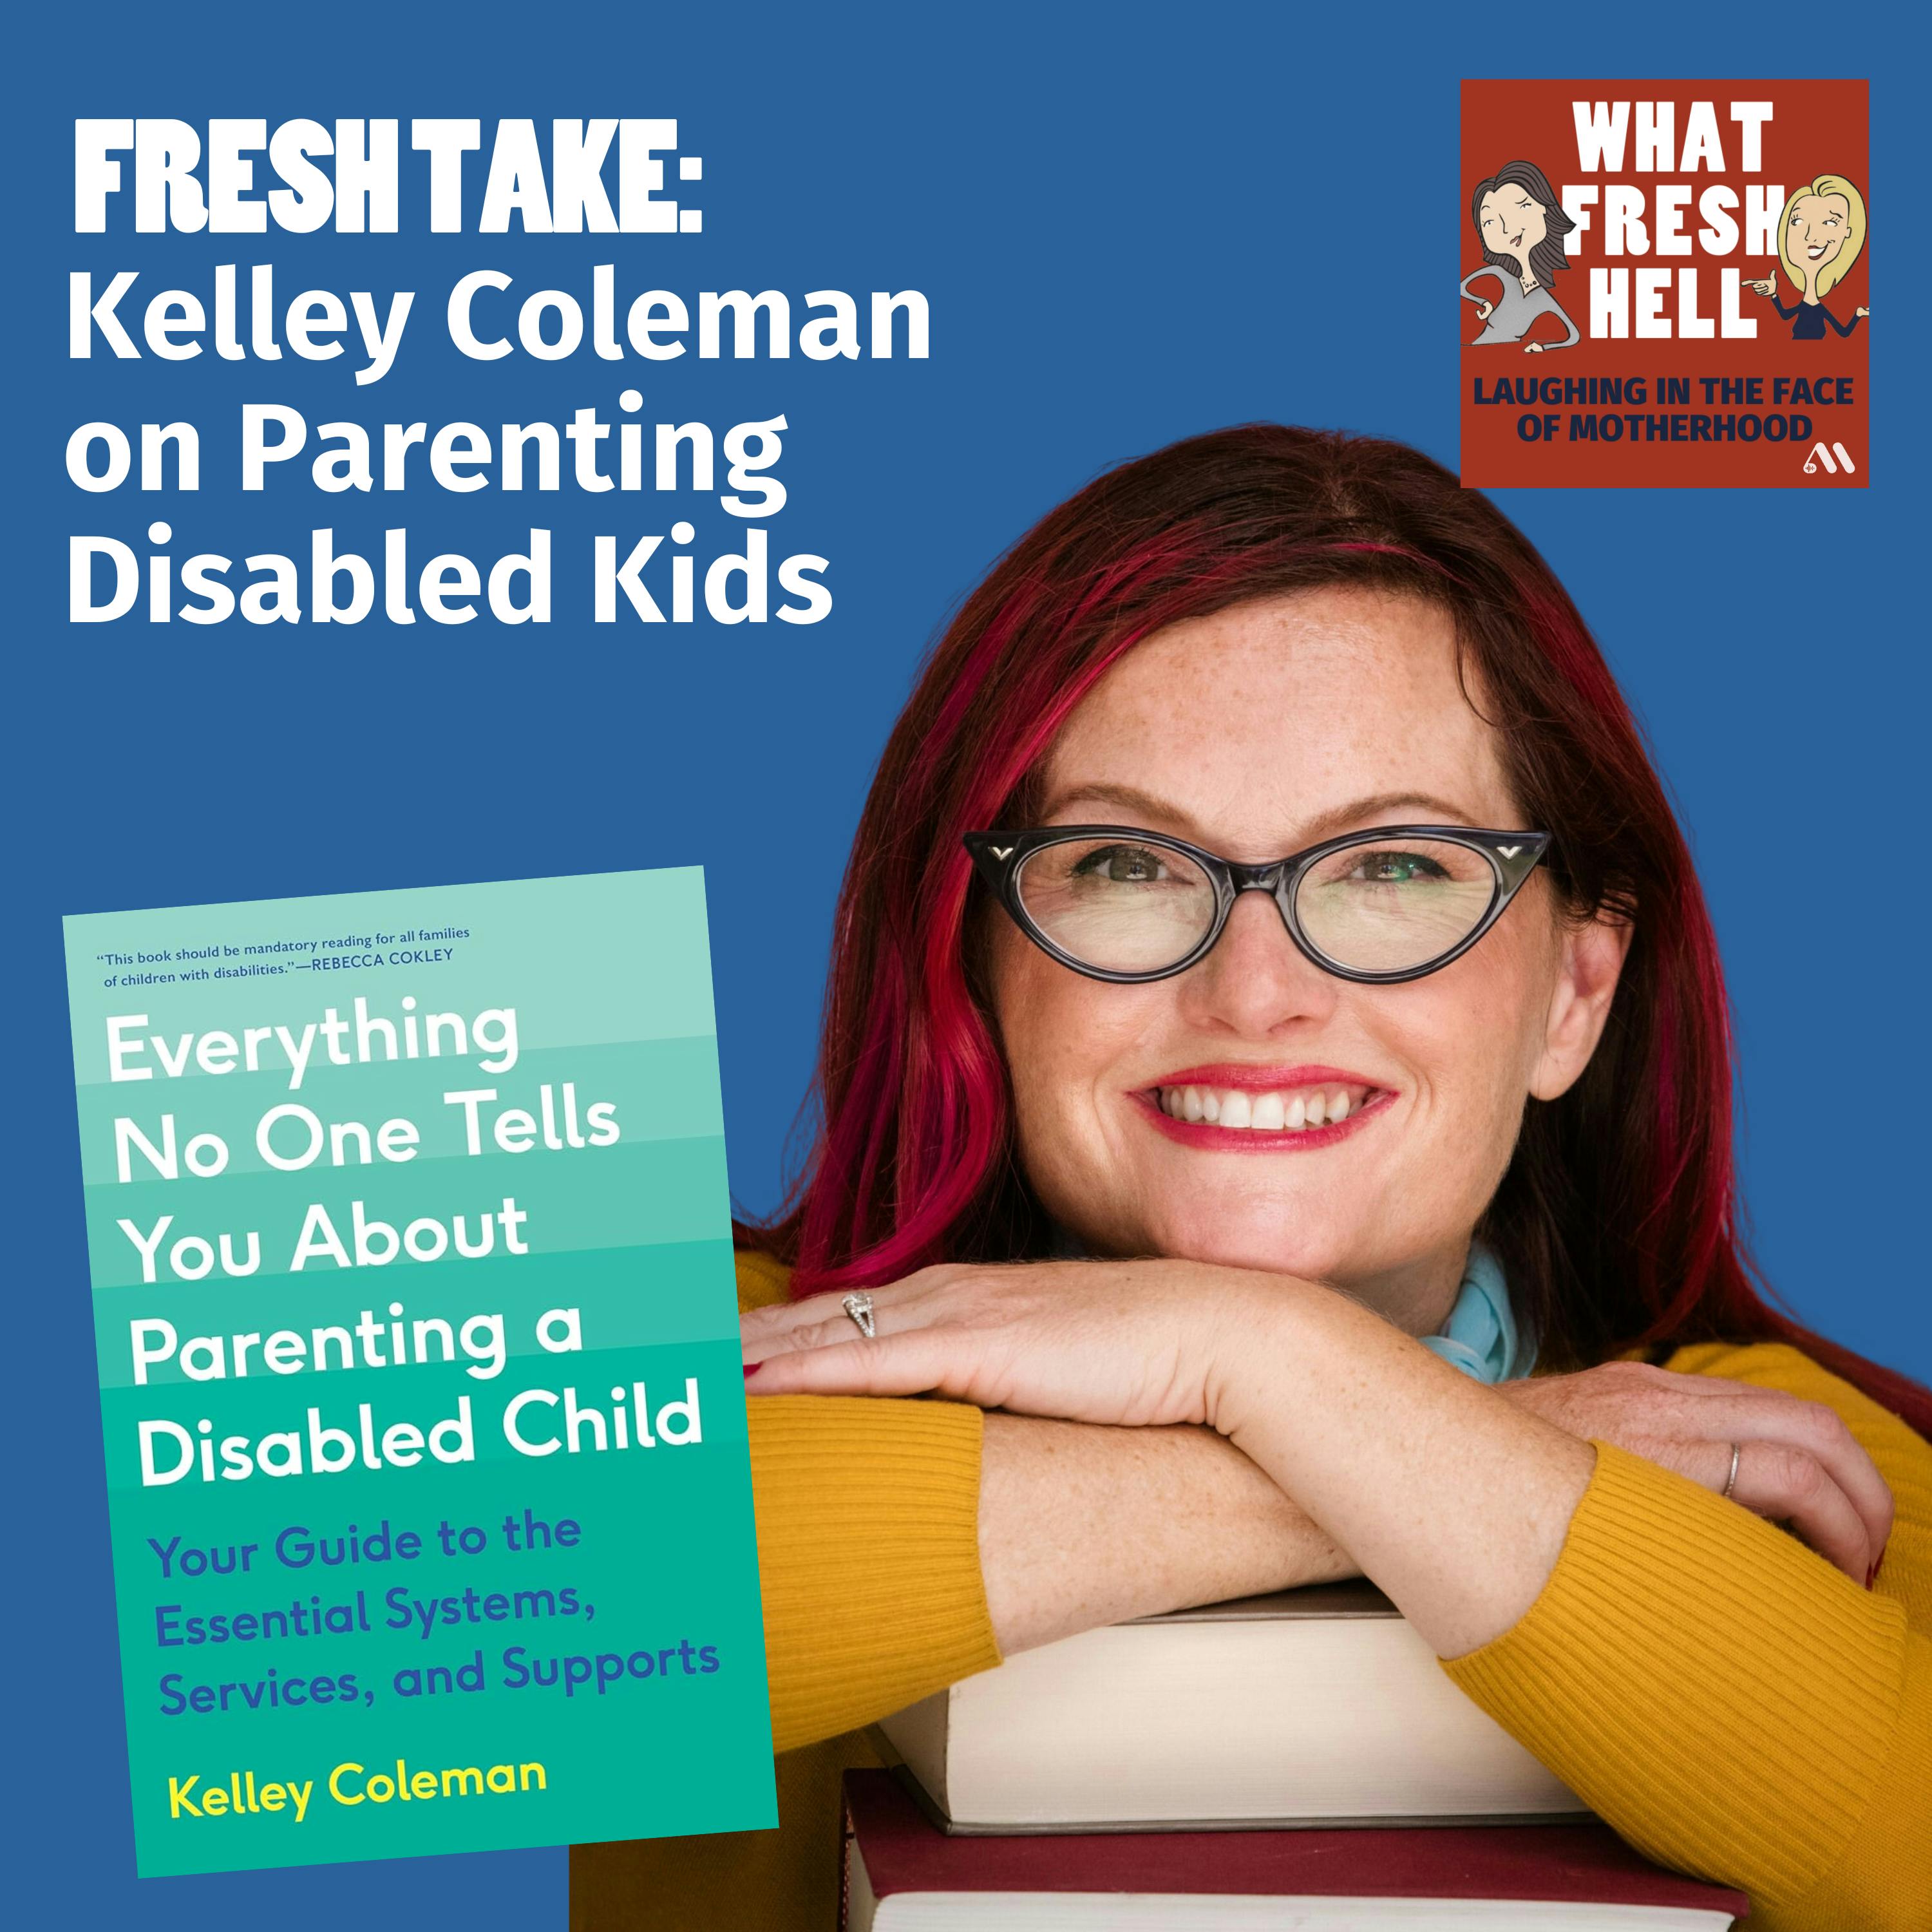 Fresh Take: Kelley Coleman on Parenting a Disabled Child